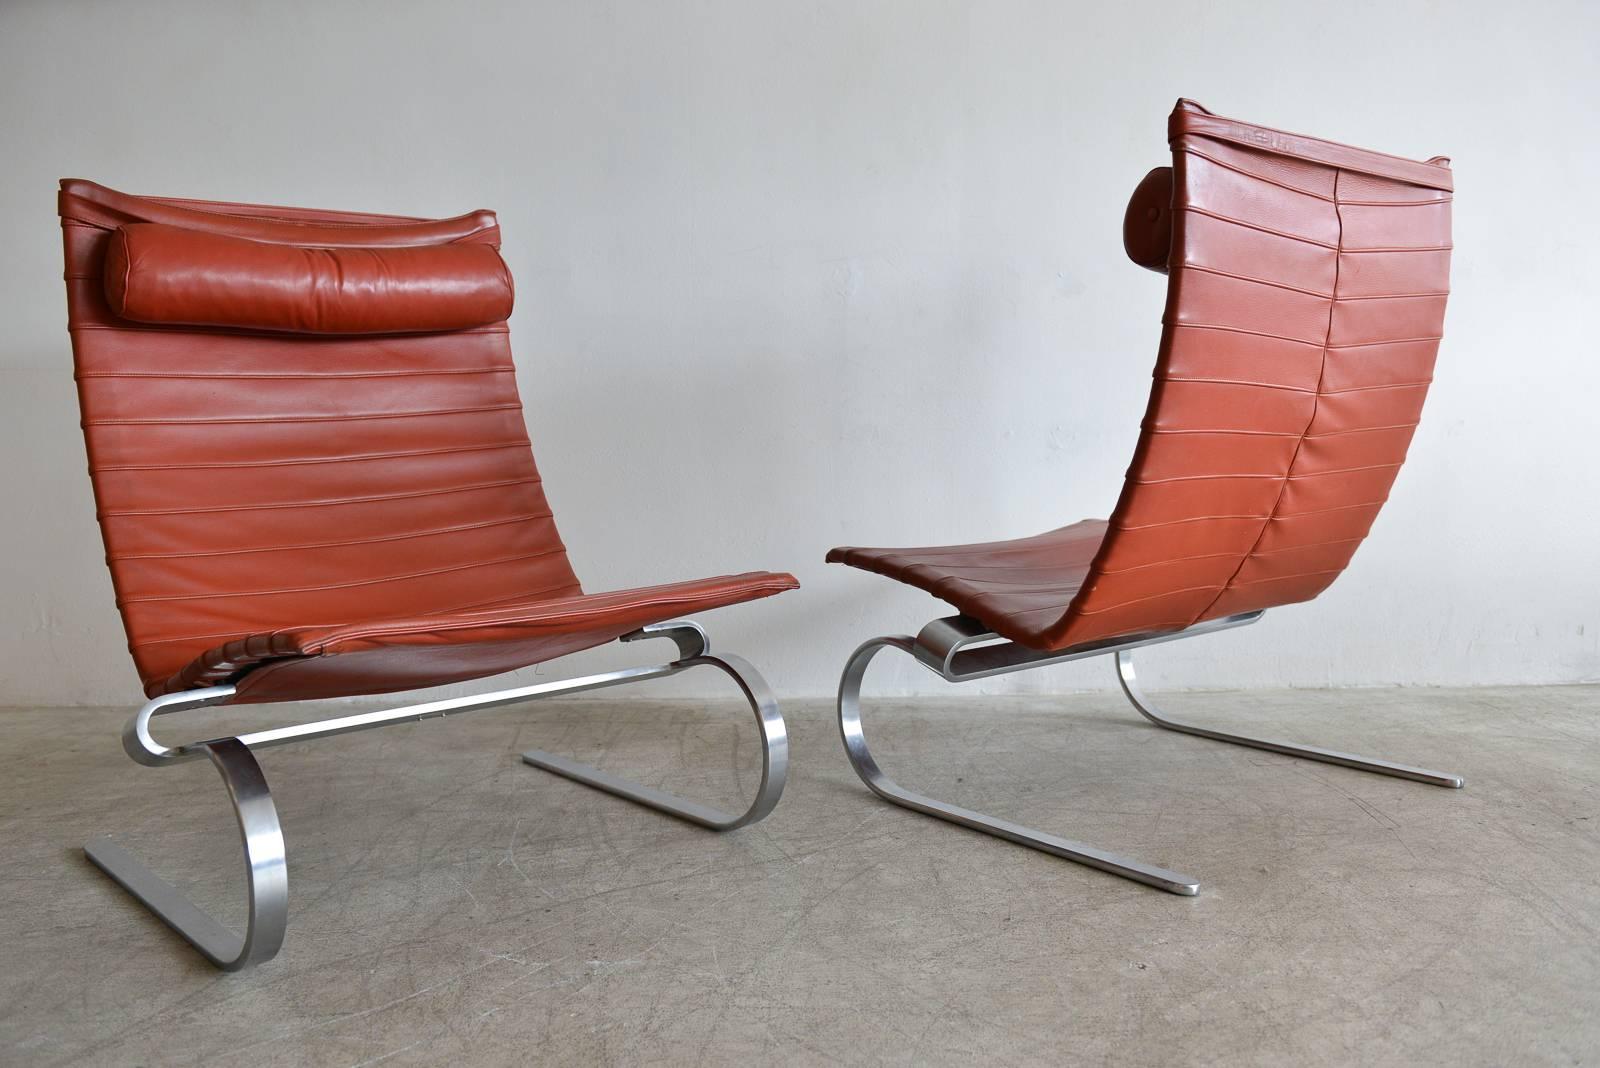 Beautiful pair of brick leather PK-20 lounge chairs by Poul Kjærholm for Fritz Hansen, circa 1989. Original brick or cognac colored leather with original neck bolsters. Marked on underside. Sculpted steel frame in excellent condition with no rust or